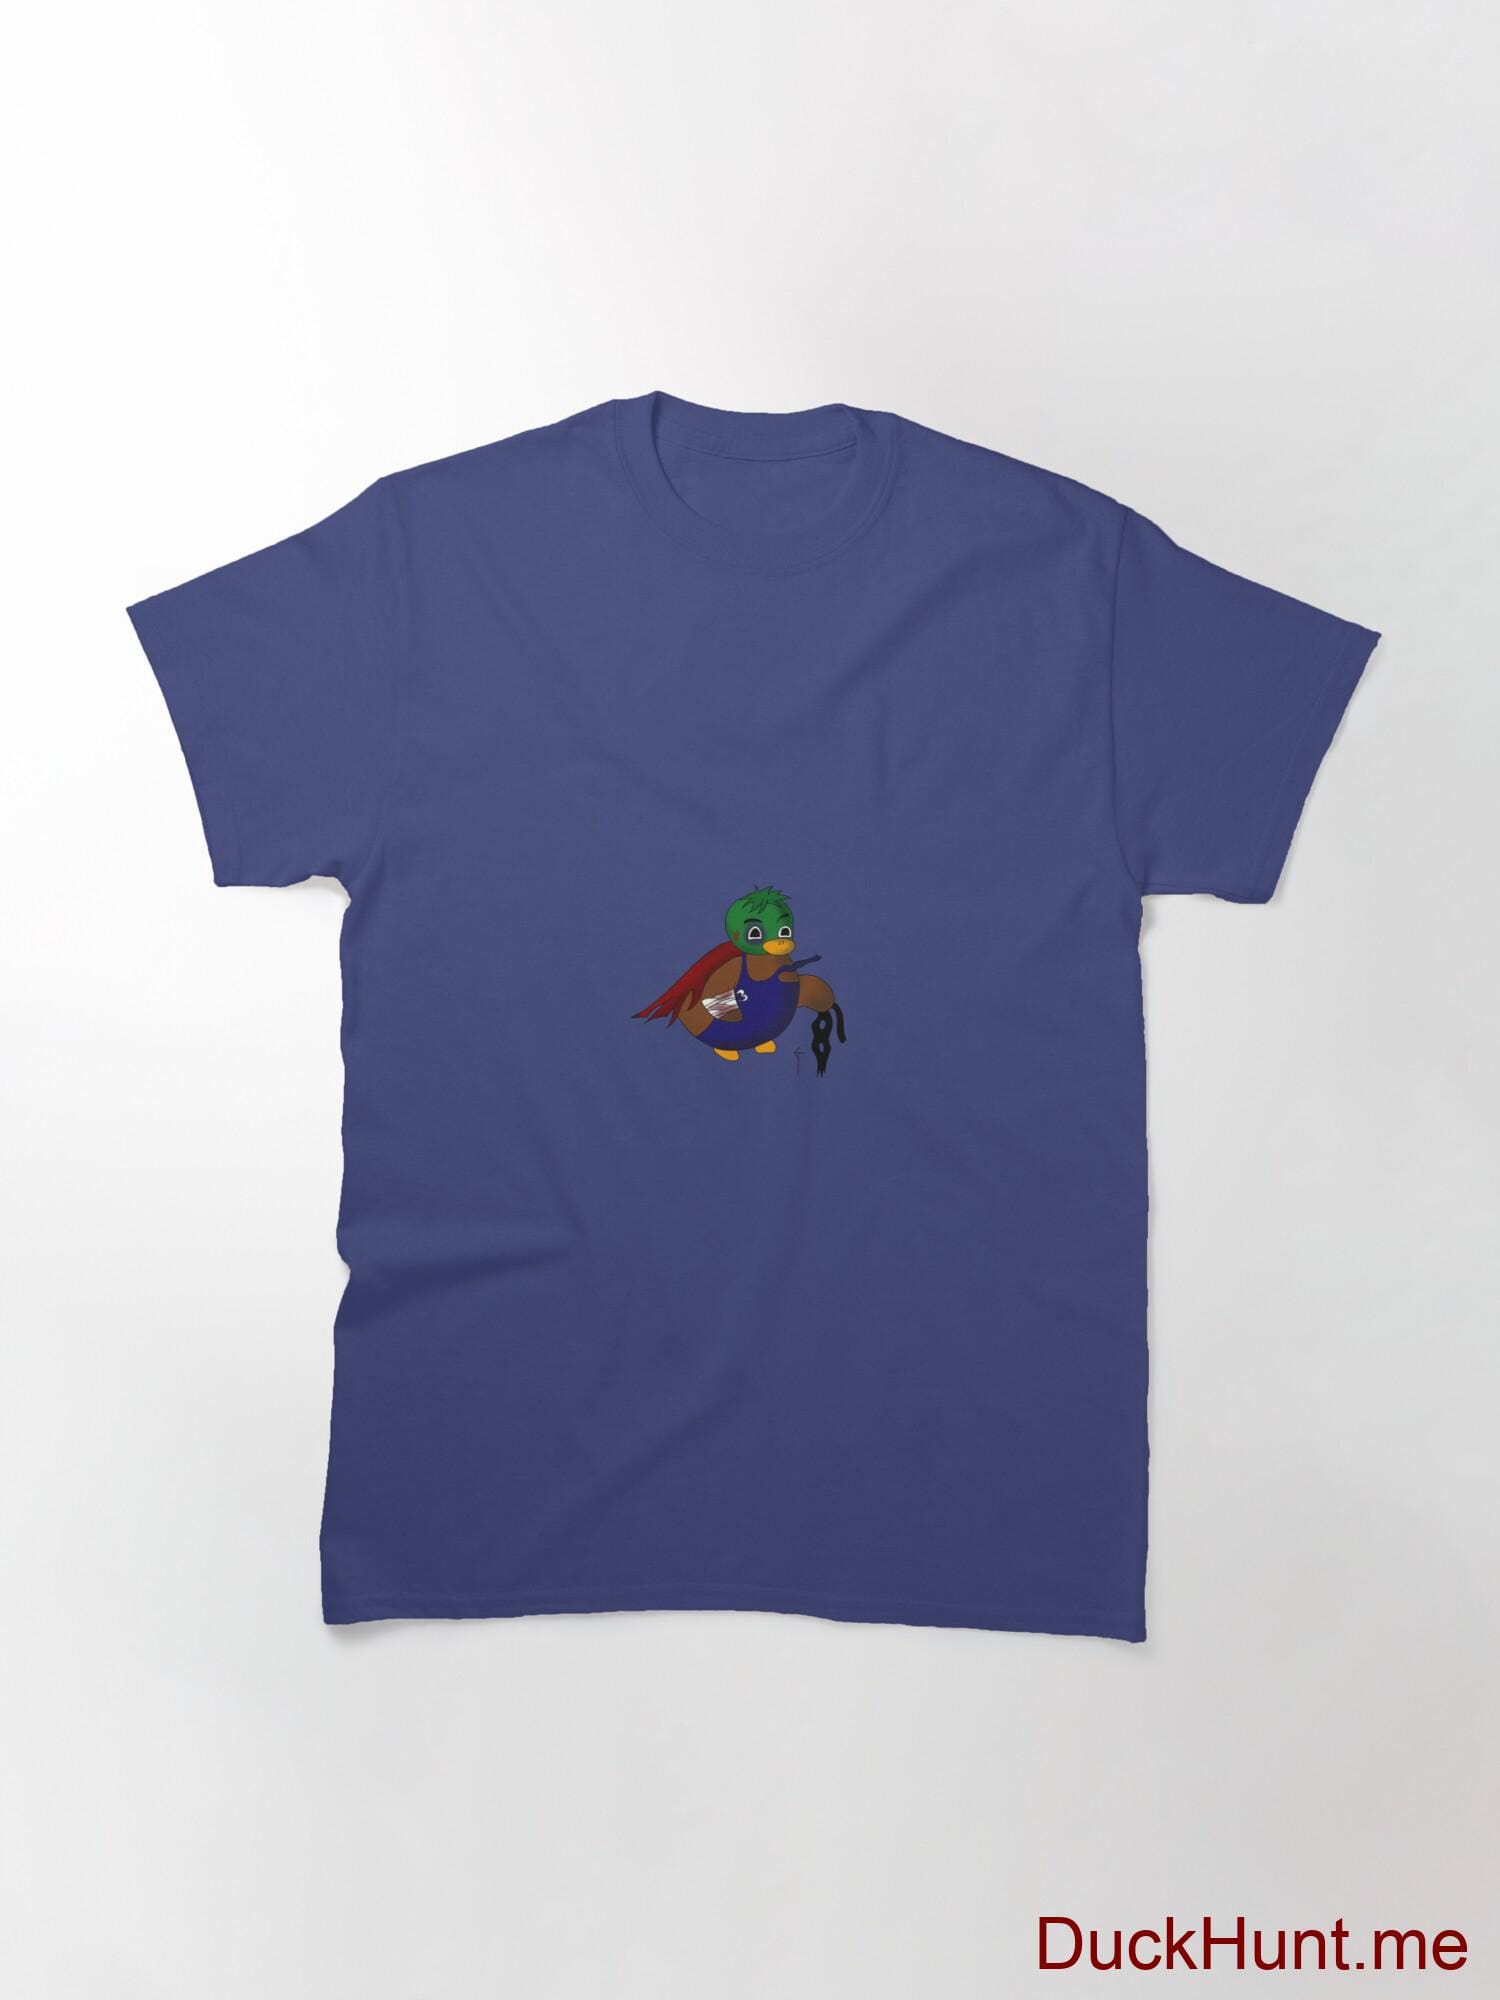 Dead DuckHunt Boss (smokeless) Blue Classic T-Shirt (Front printed) alternative image 2